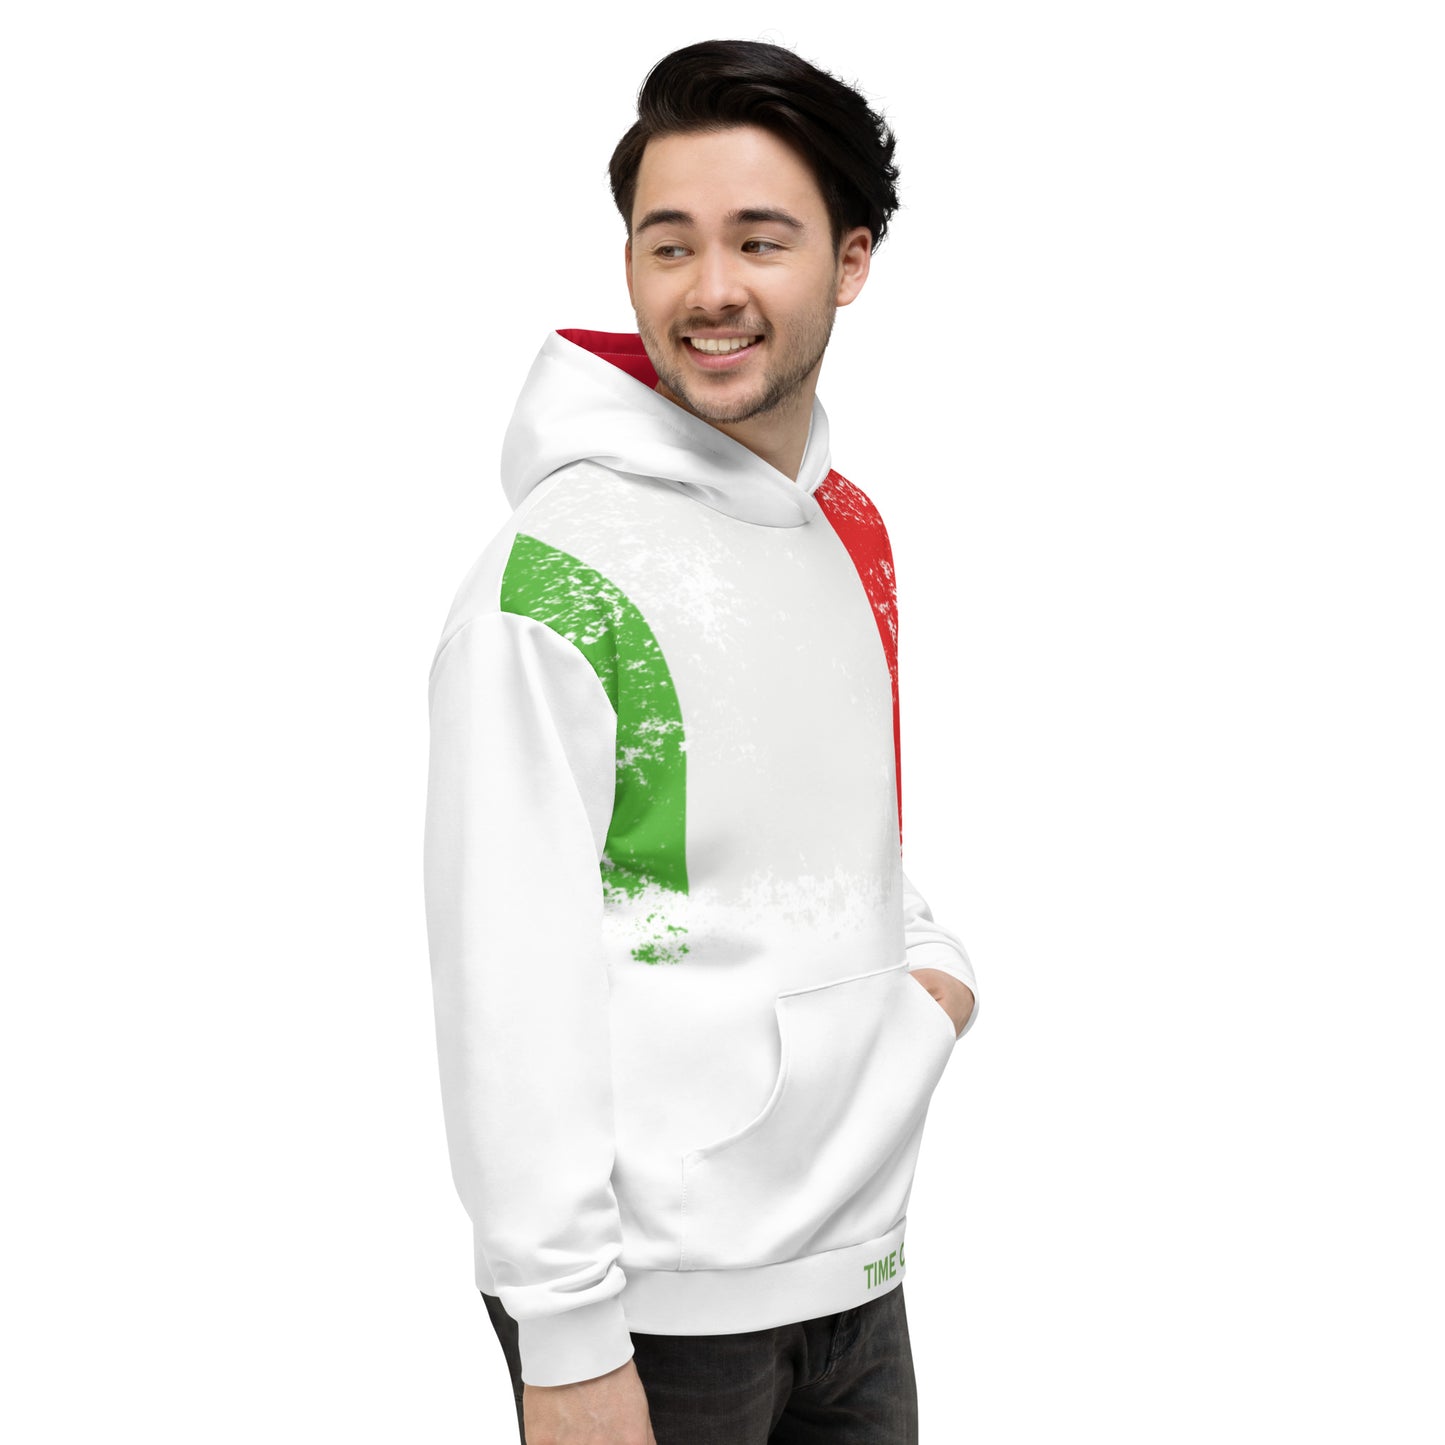 TIME OF VIBES - Premium Hoodie LOVE MEXICO - €99.00